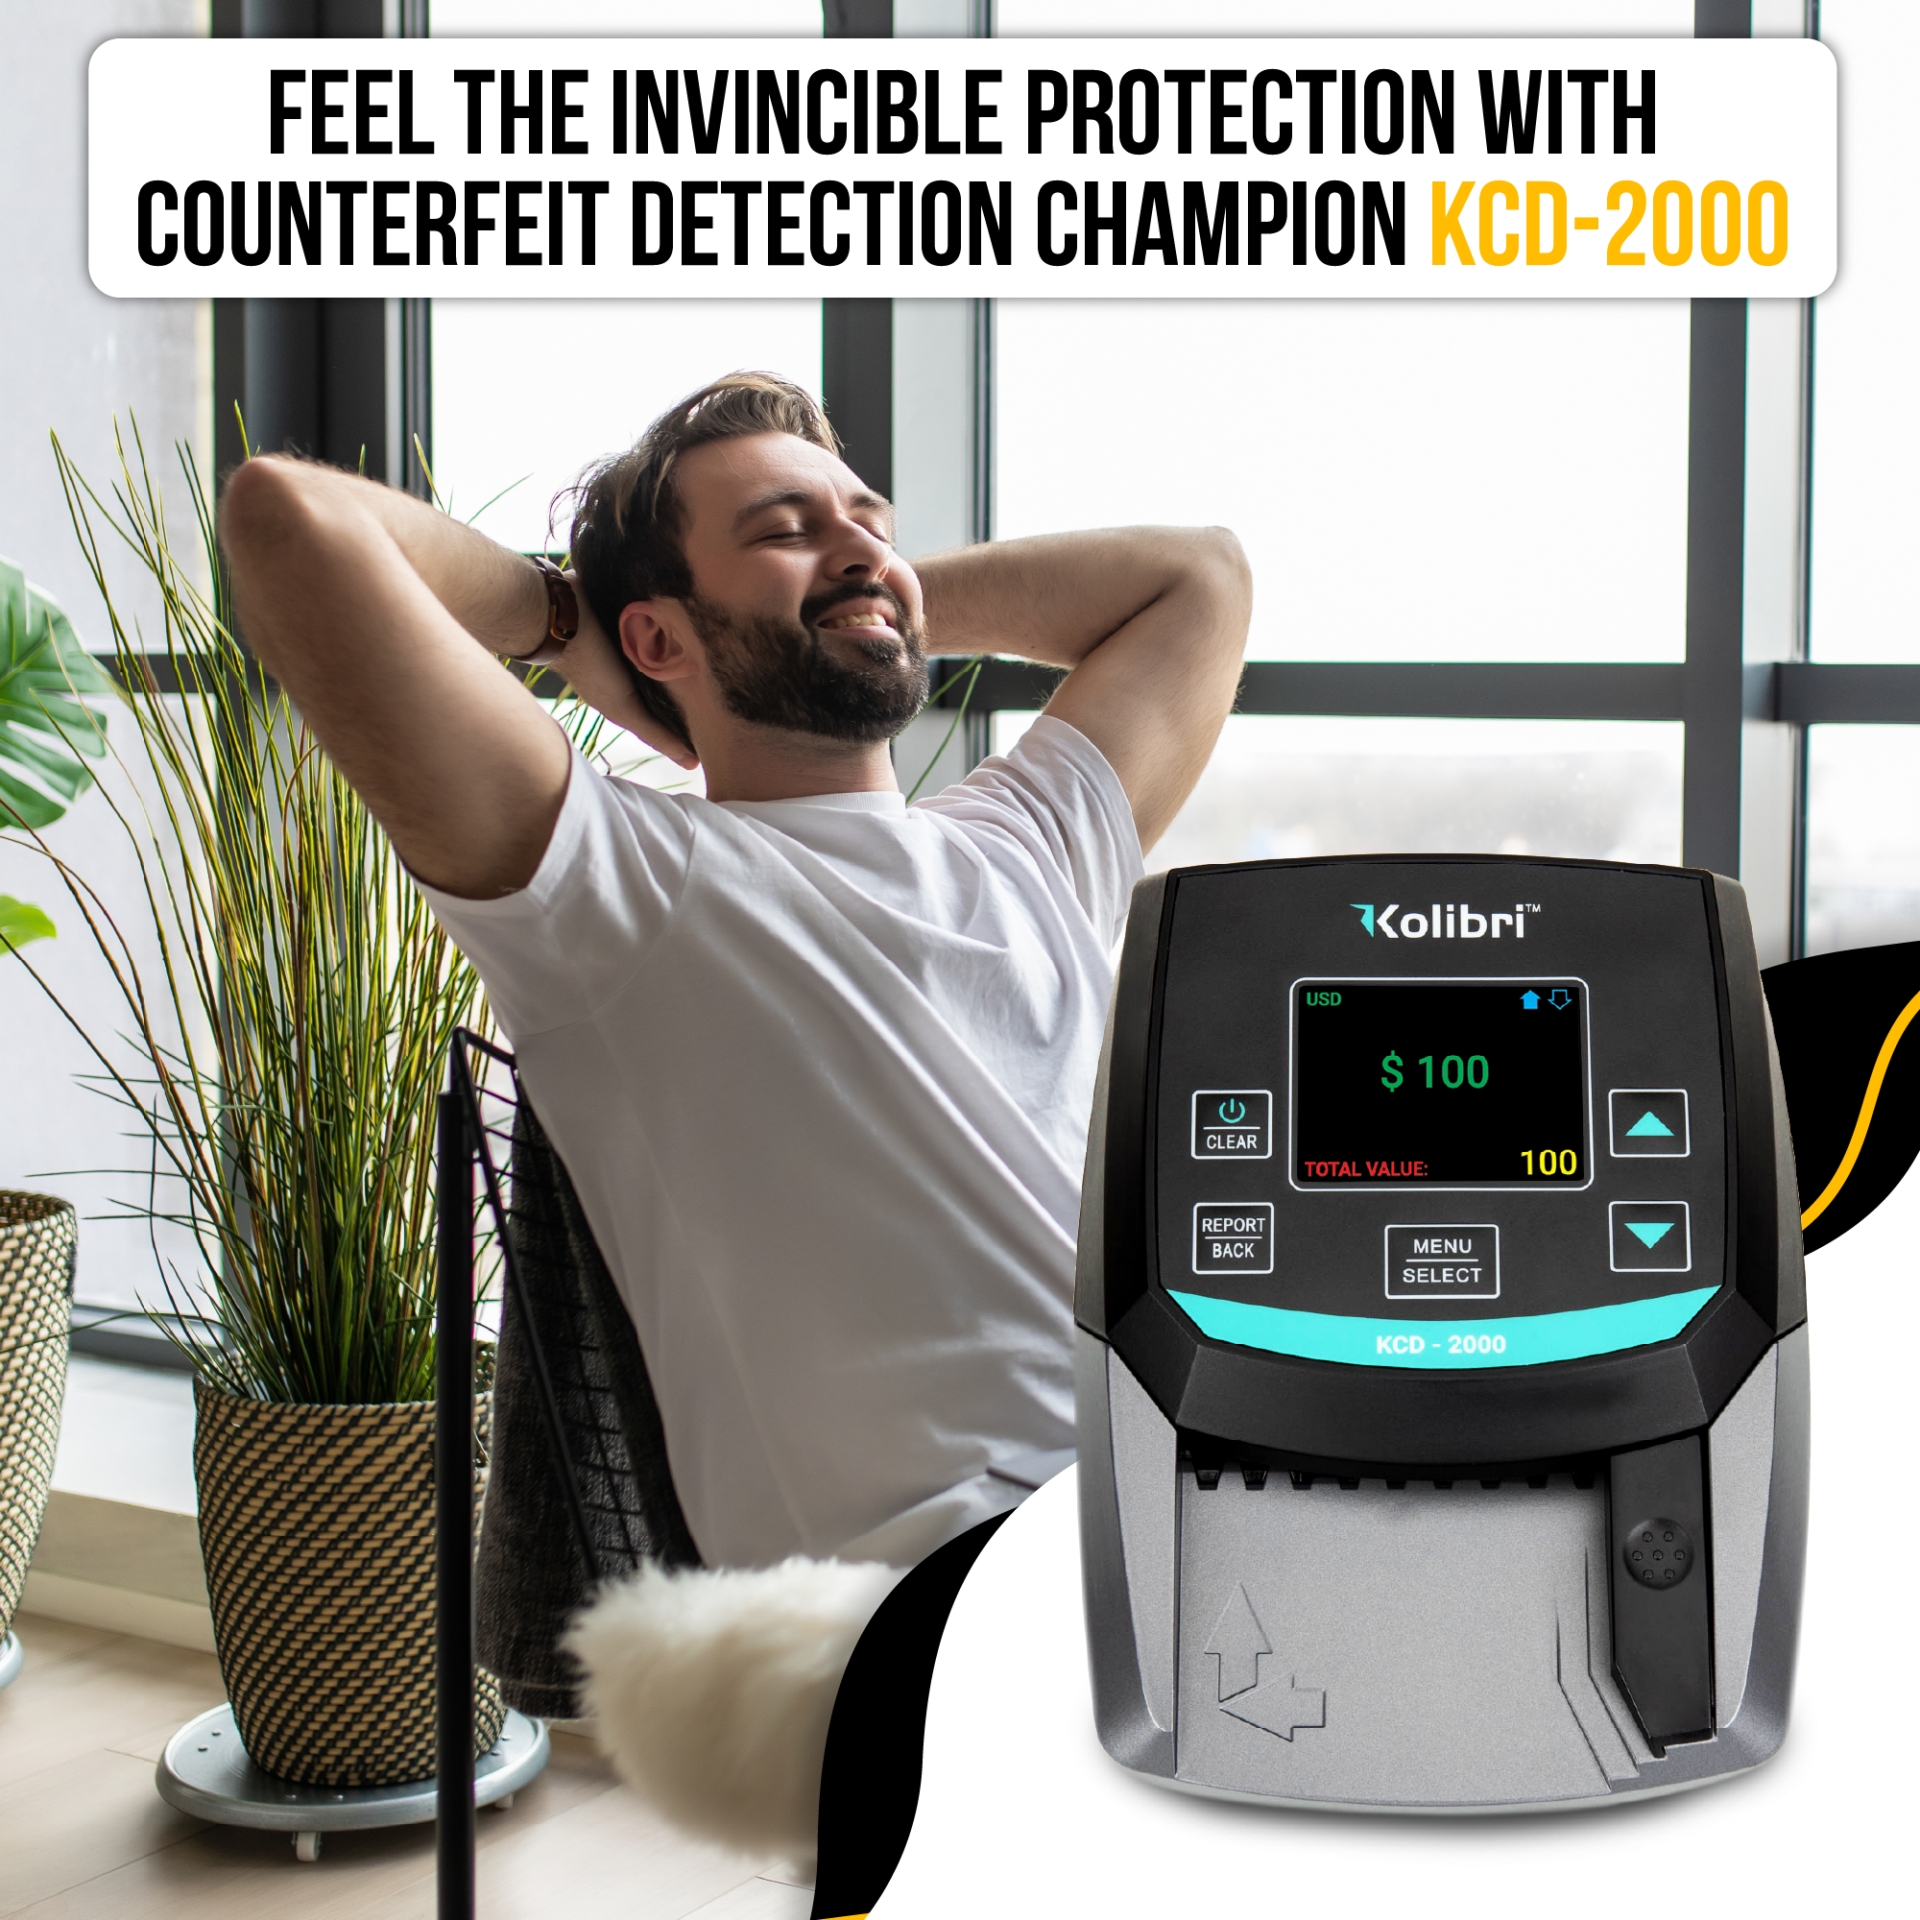 Feel the Invincible Ptotection with Counterfeit Detection Champion KCD-2000